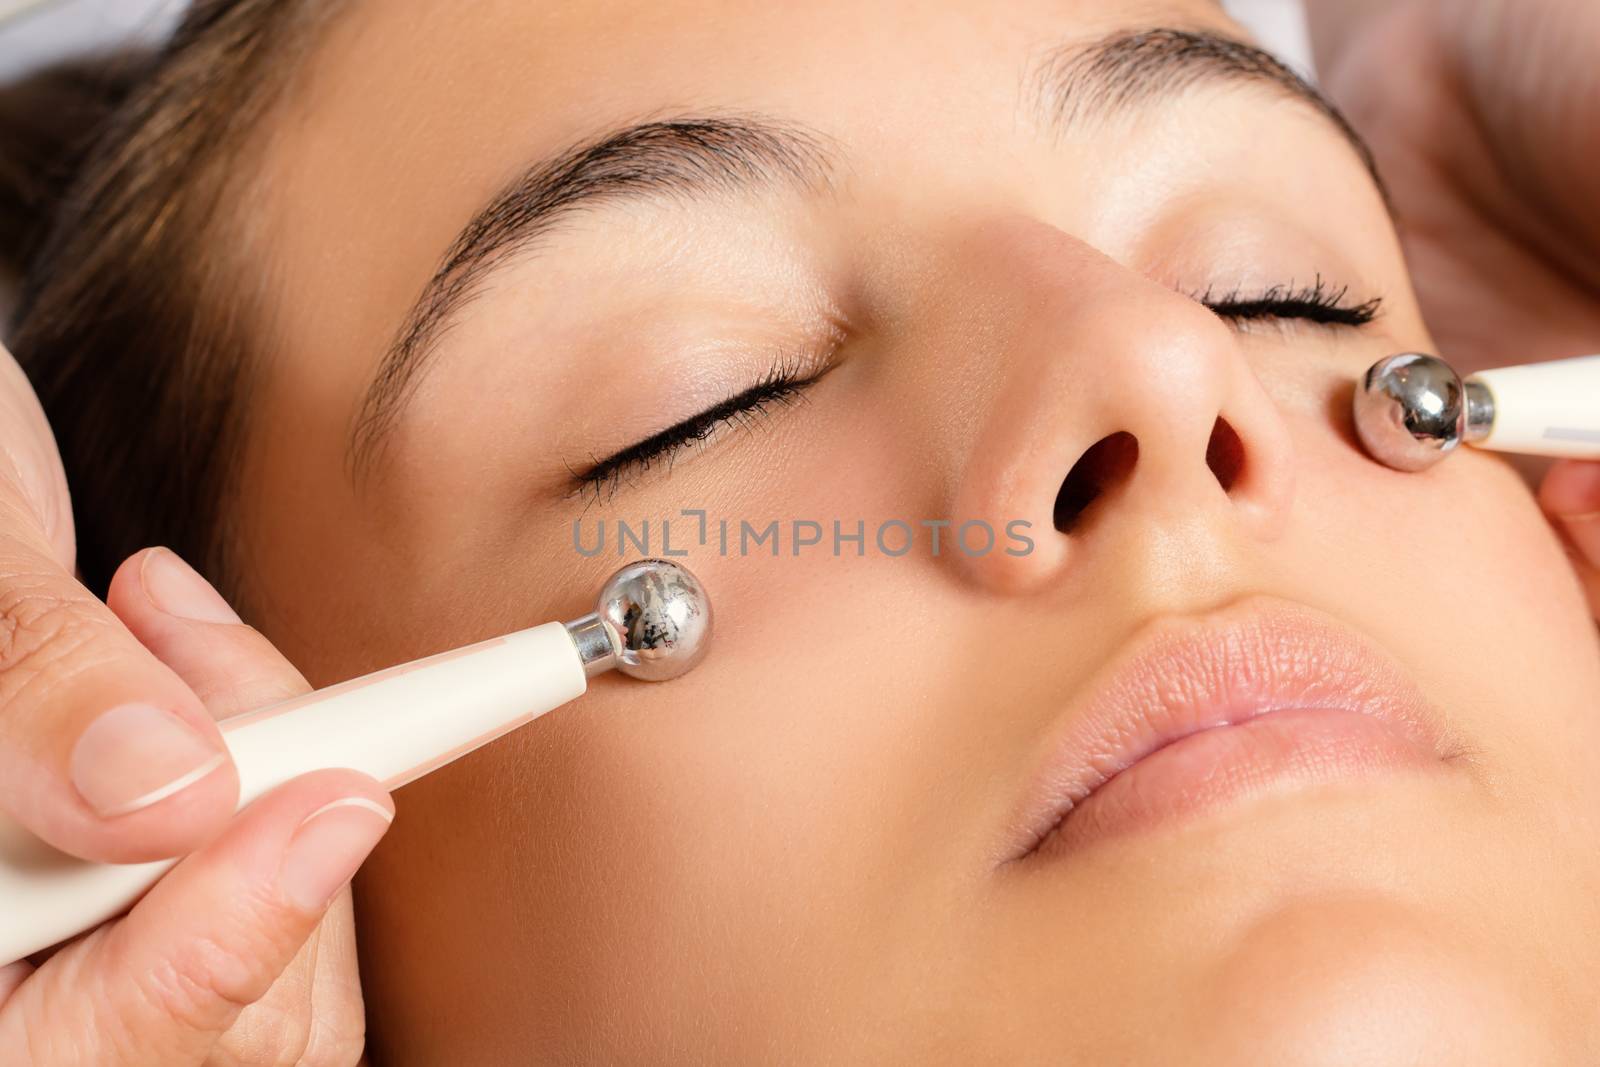 Close up portrait of woman having Galvanic facial treatment with low level current electrodes.